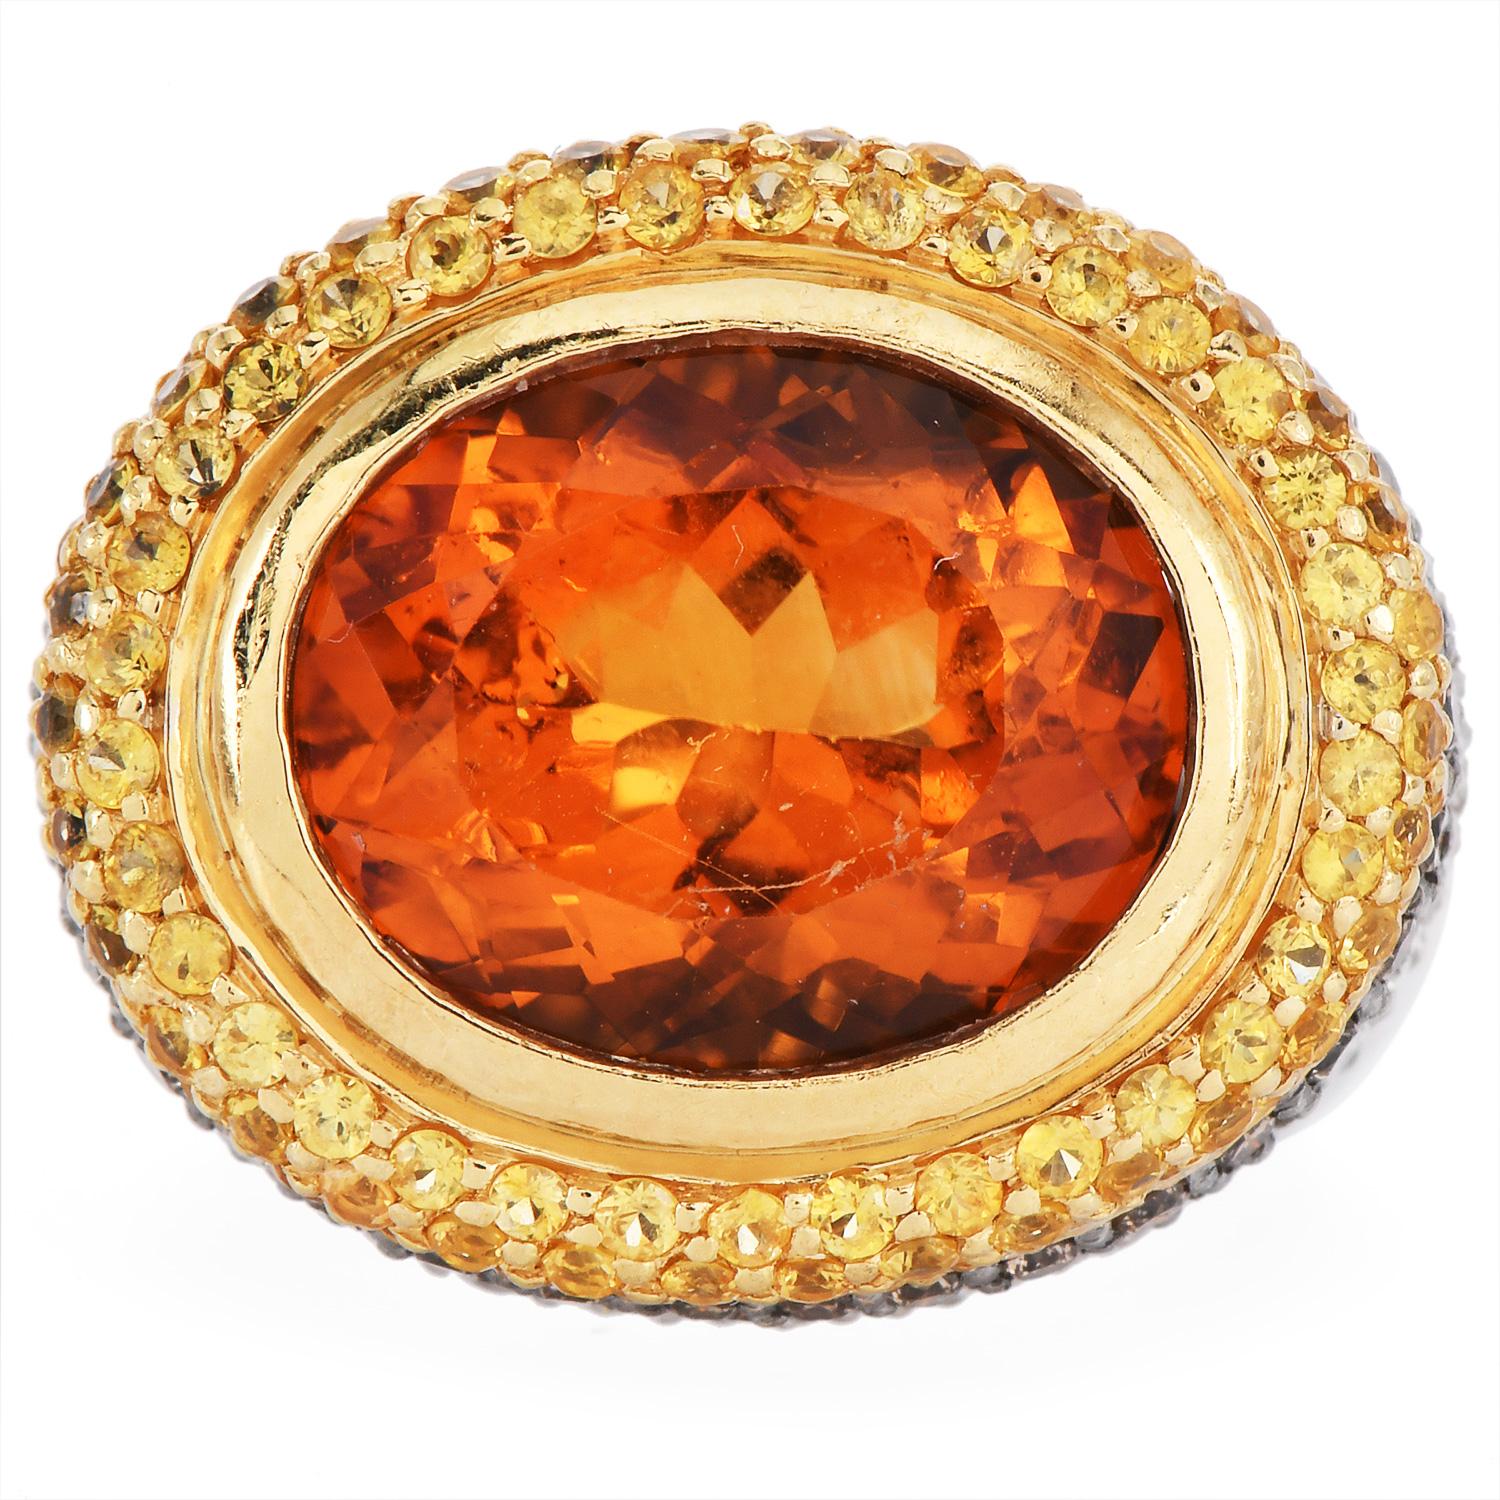 Treat yourself to this irresistibly stunning Estate fancy Diamond Citrine, Yellow sapphire  18K Gold Large Cocktail Ring!  This ring is crafted in hefty 18-karat white gold.  The center gemstone is one oval-shape genuine deep orange color Citrine of